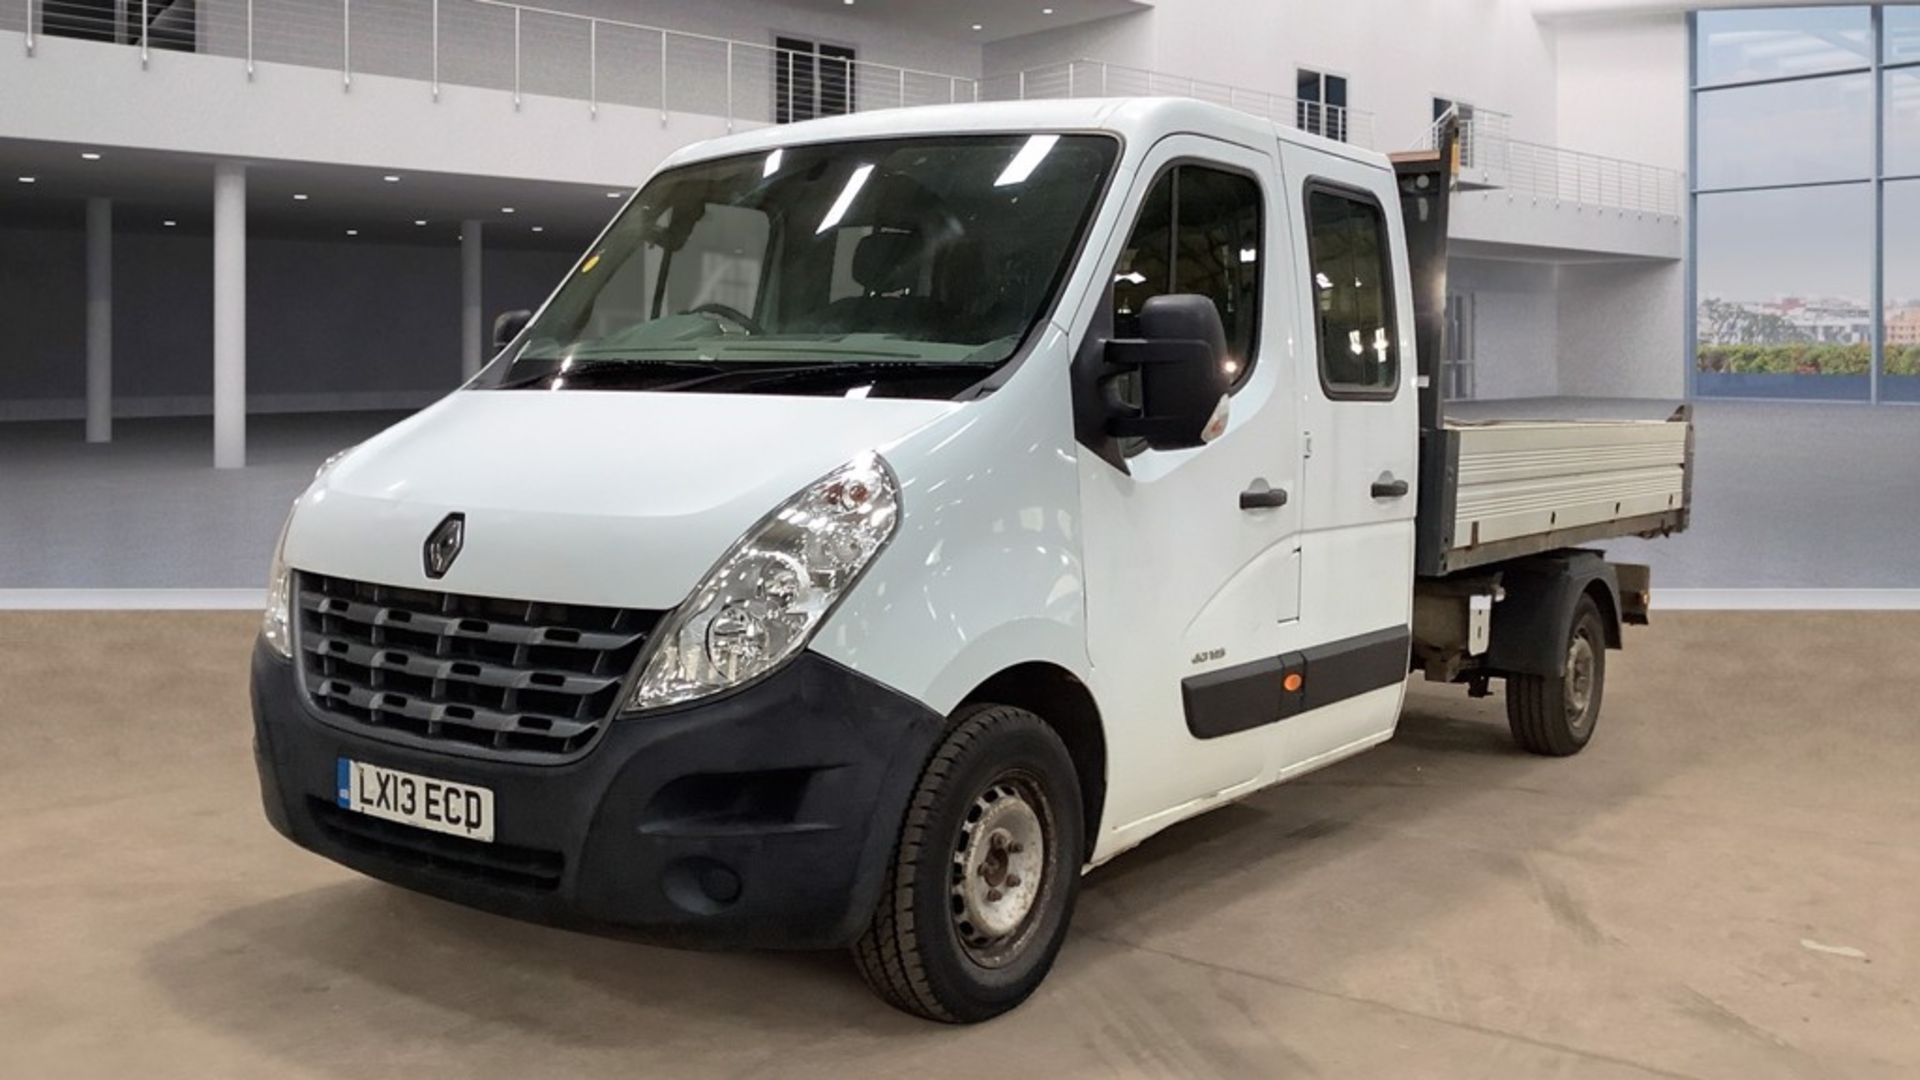 ** ON SALE ** Renault Master 2.3 DCI 125 LL35 DRW RWD L3 Crew Dropside 2013 '13 Reg' - Alloy Body - Image 2 of 9